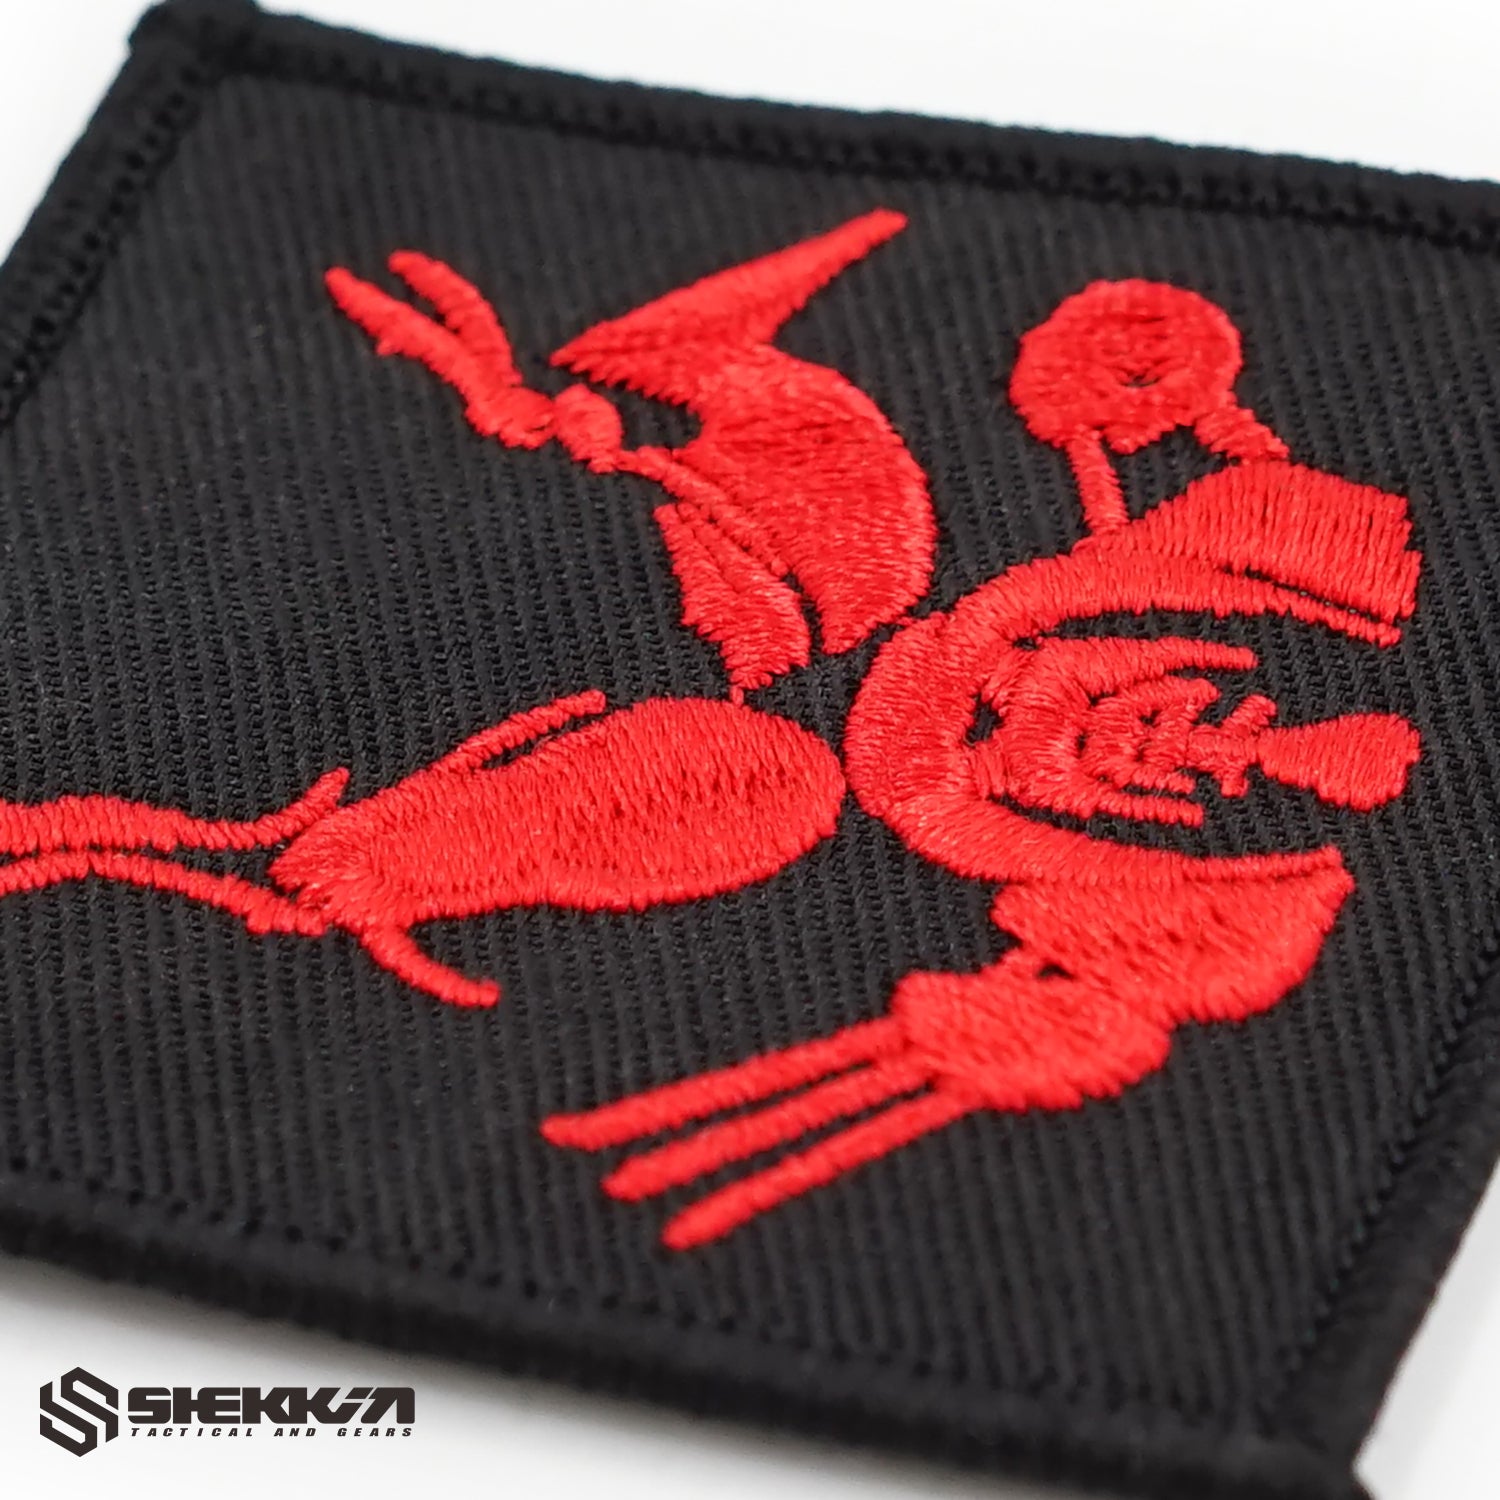 Delta force CAG Wolverine Patch - Shekkin Gears